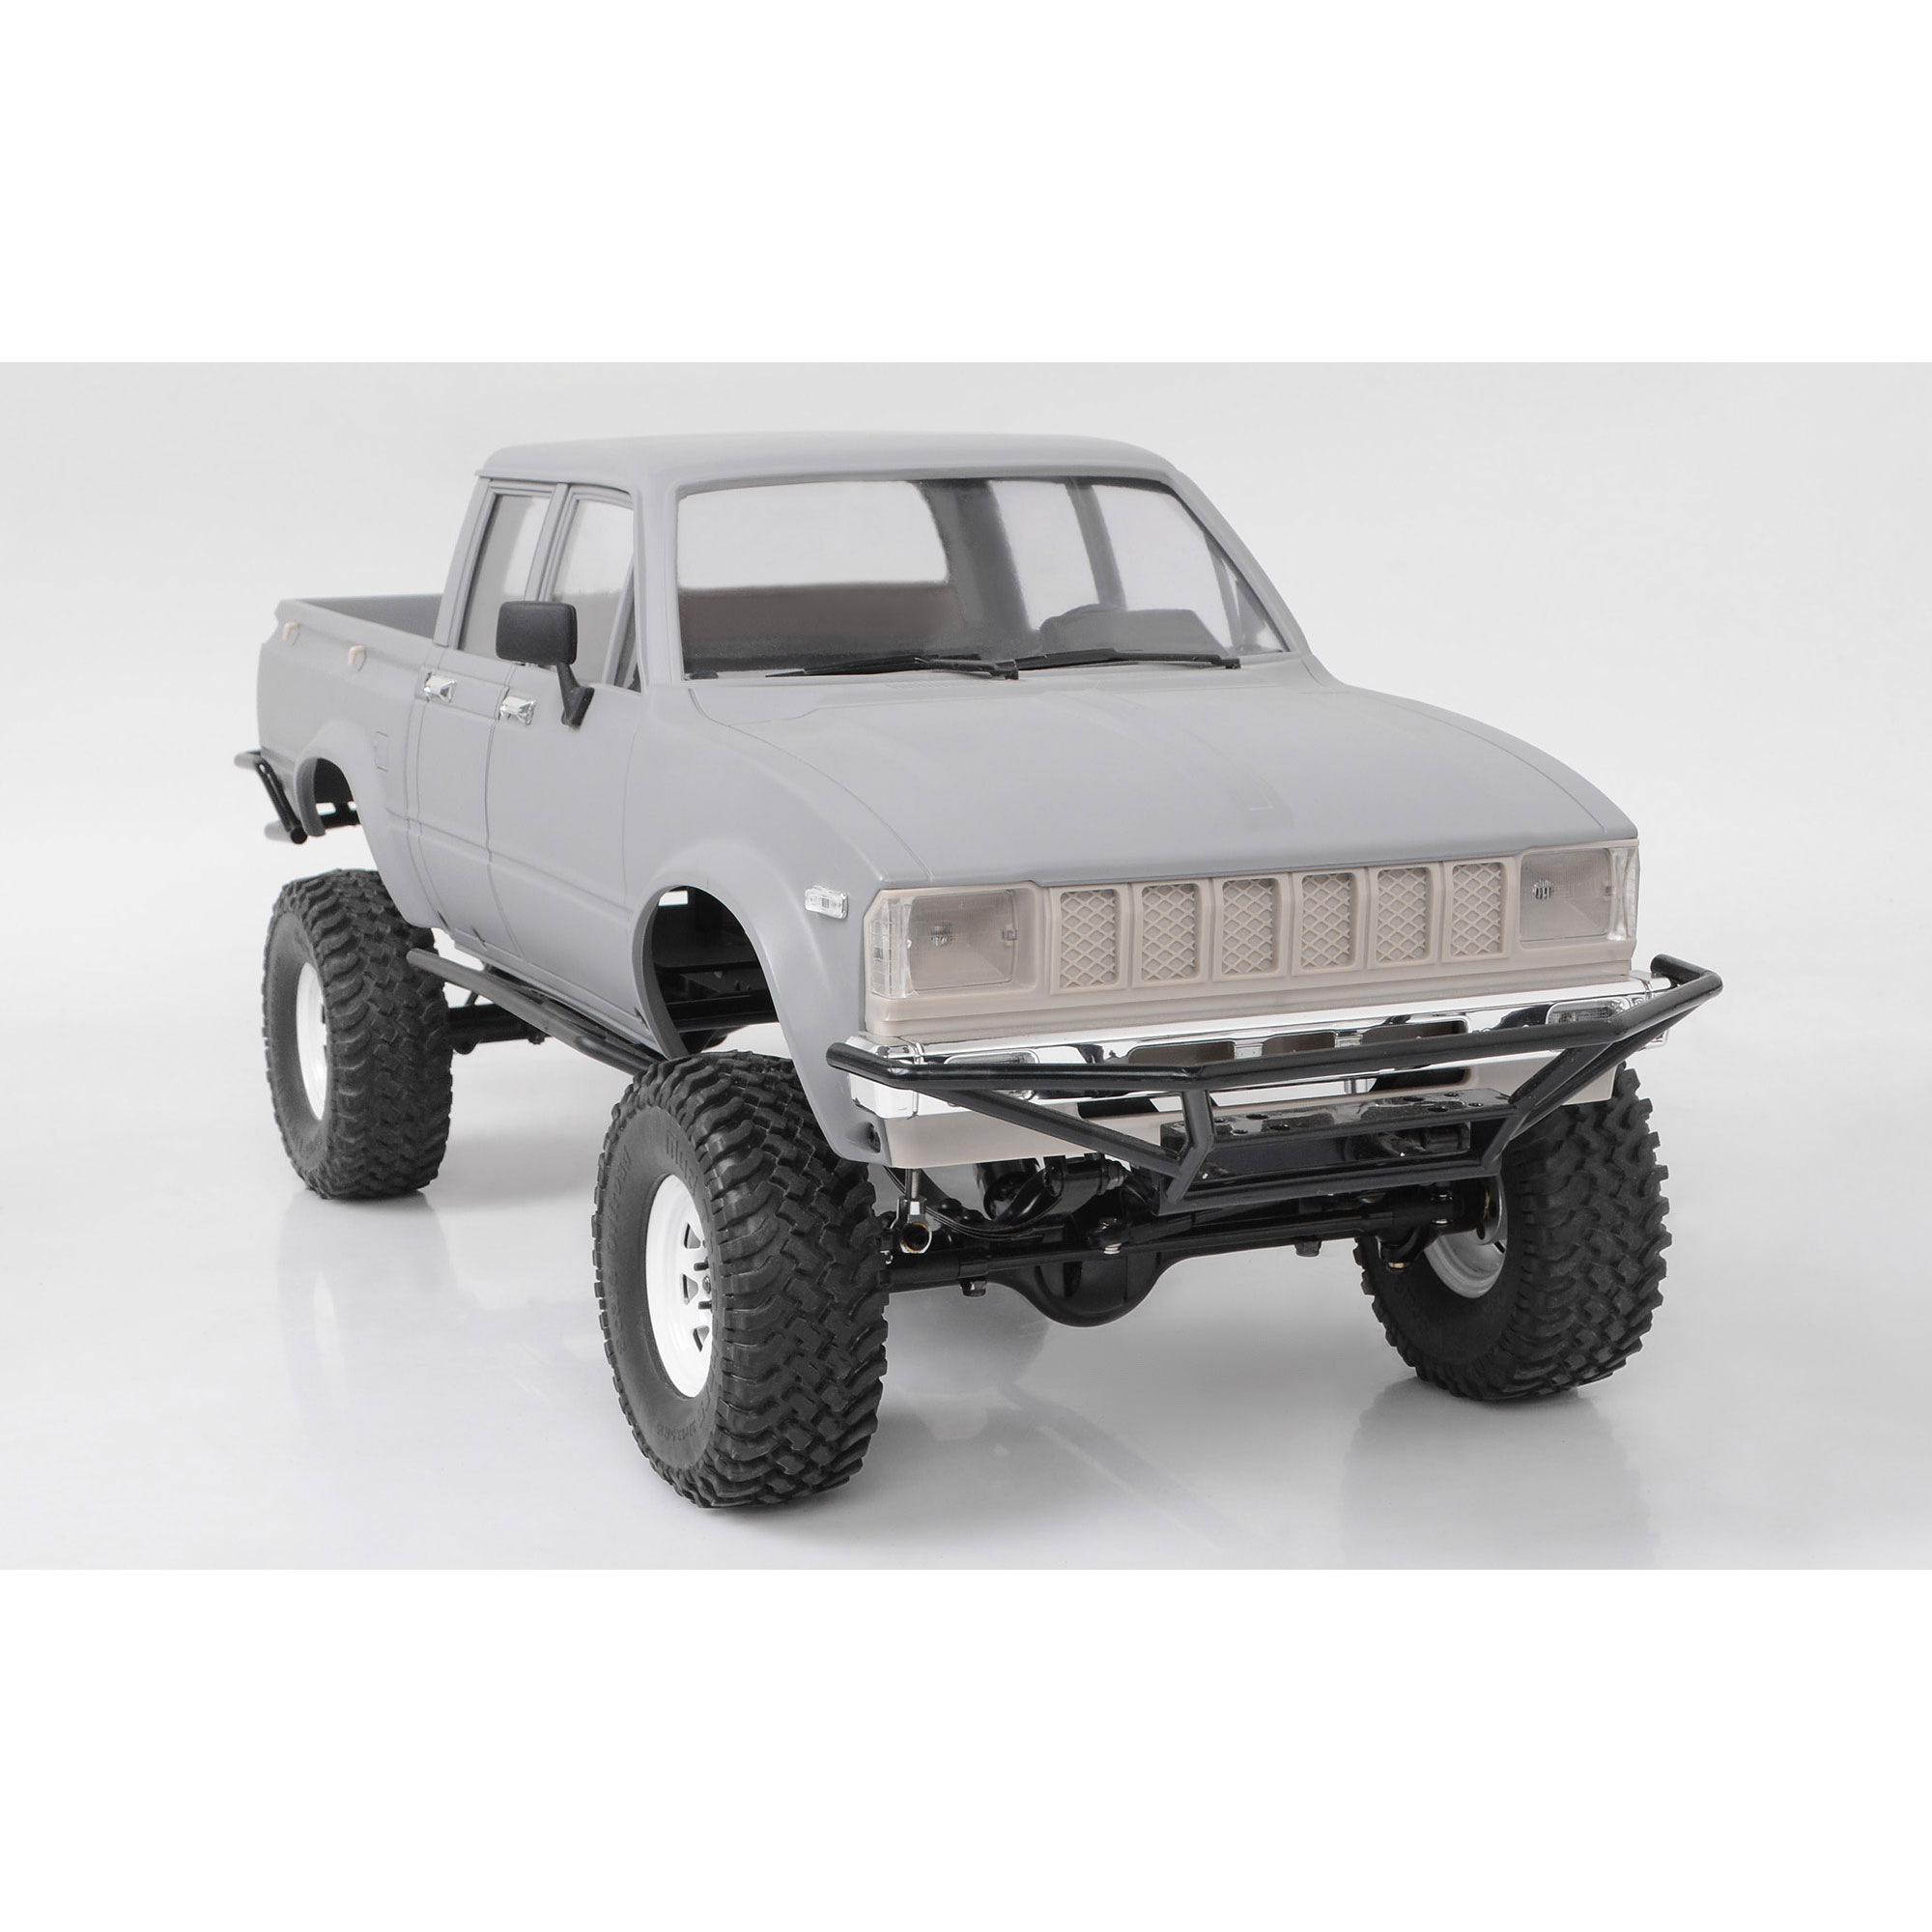 Trail Finder 2 Truck Kit LWB 1/10 Scale Long Wheel Base Chassis ONLY Kit Z-K0059 